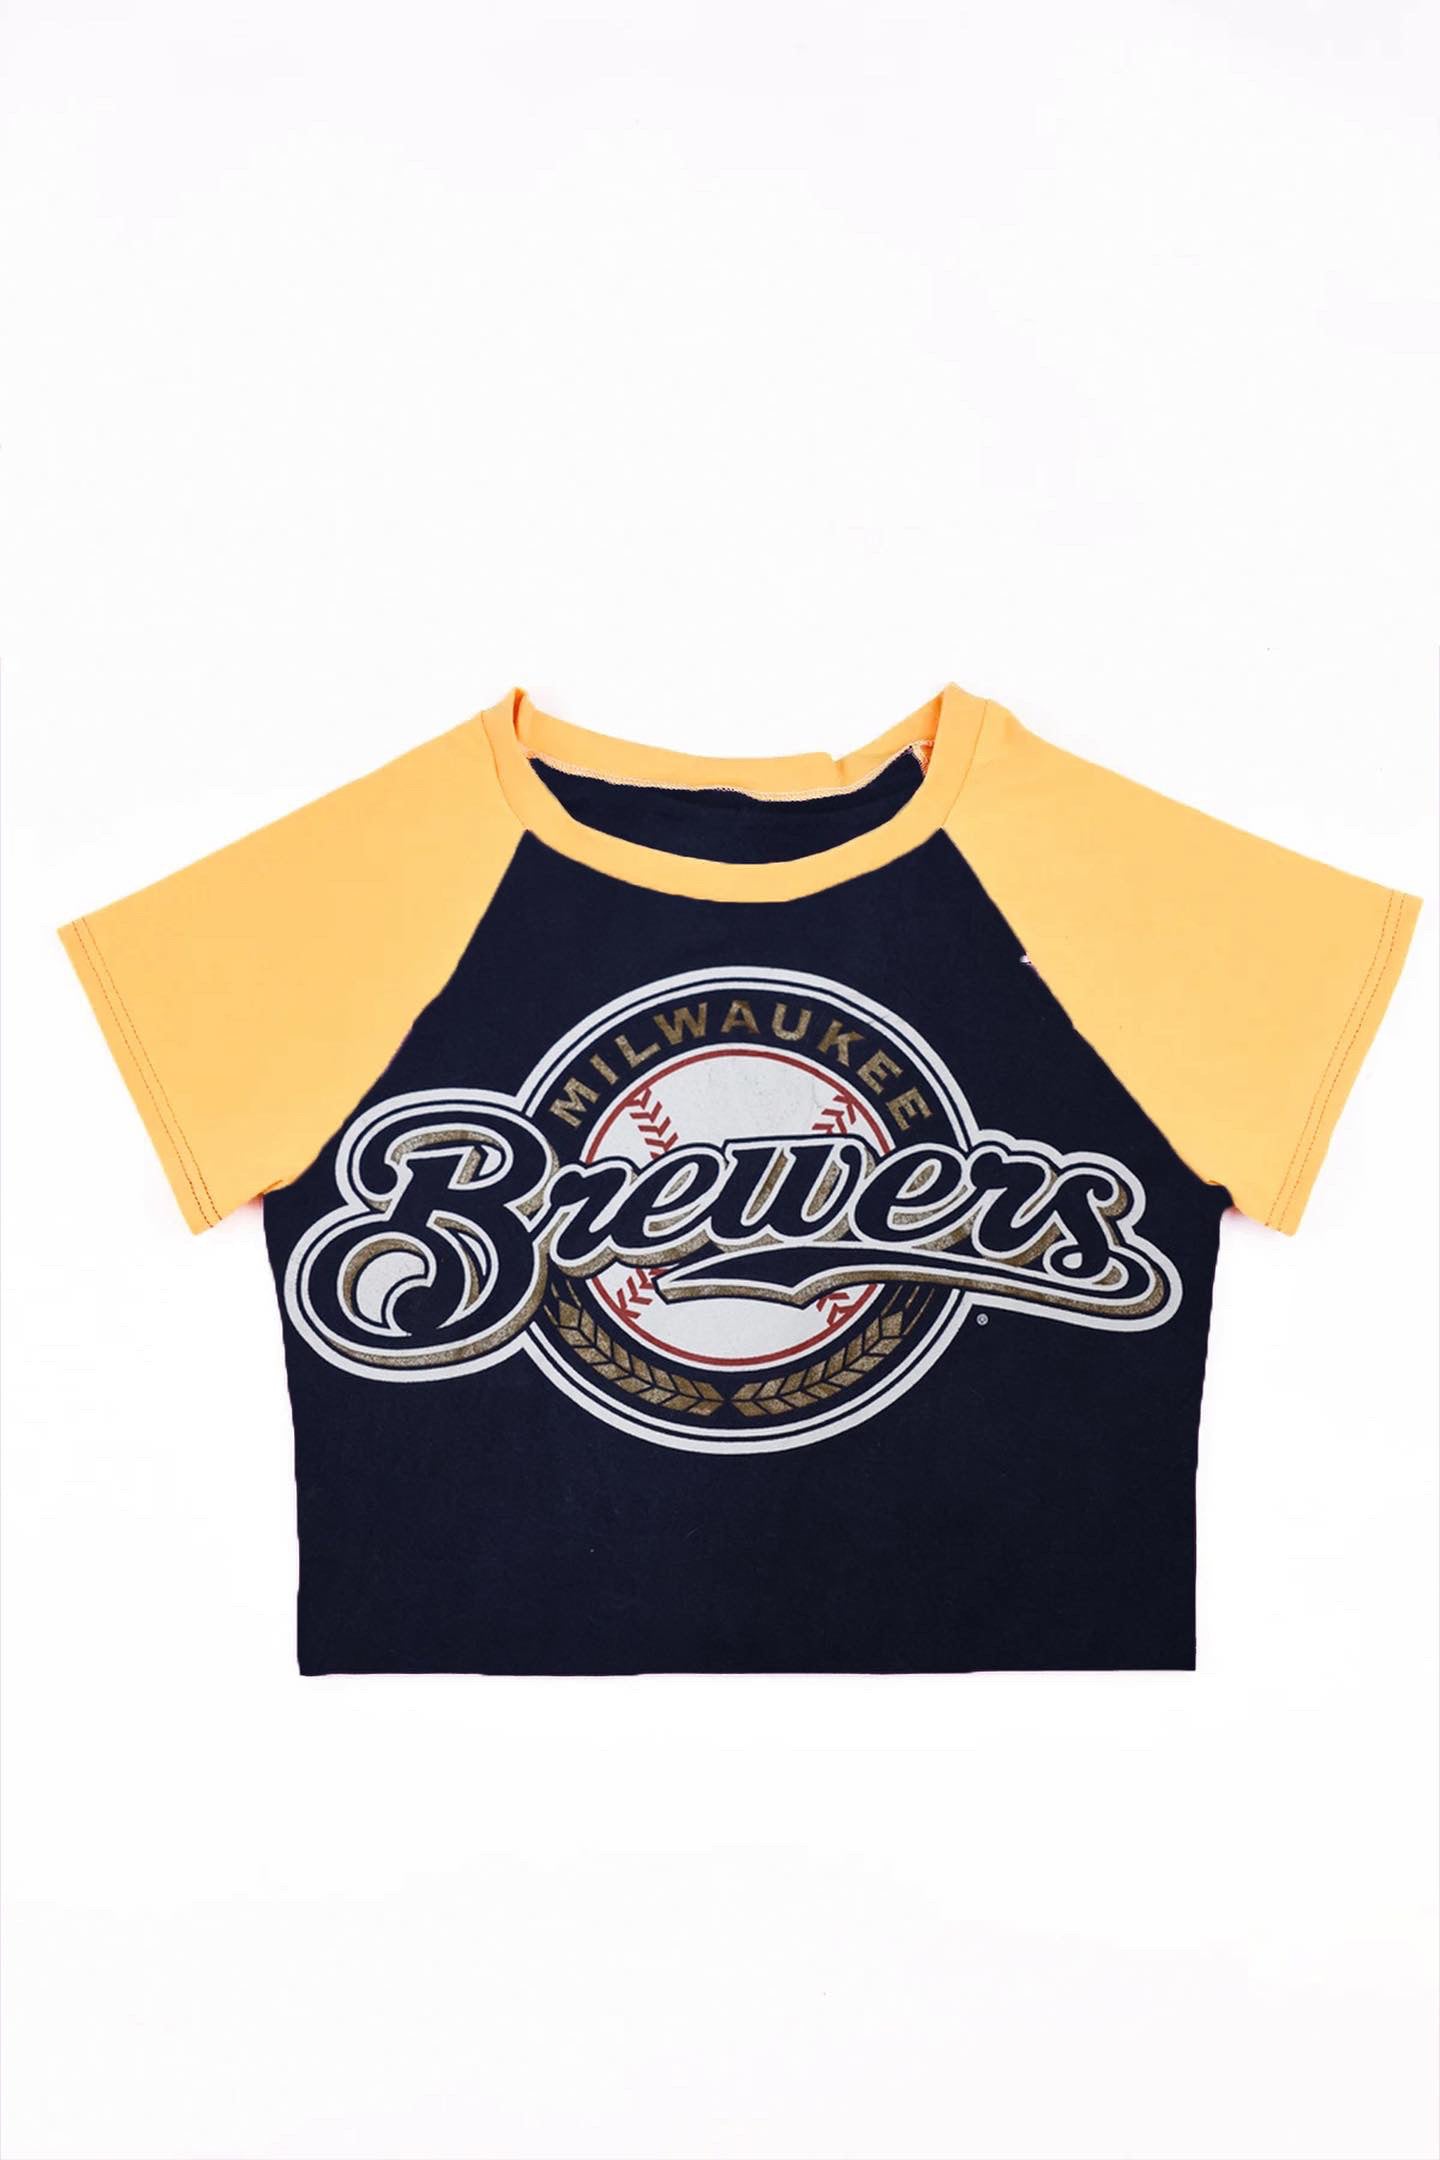 Upcycled Brewers Baby Tee For Rayna